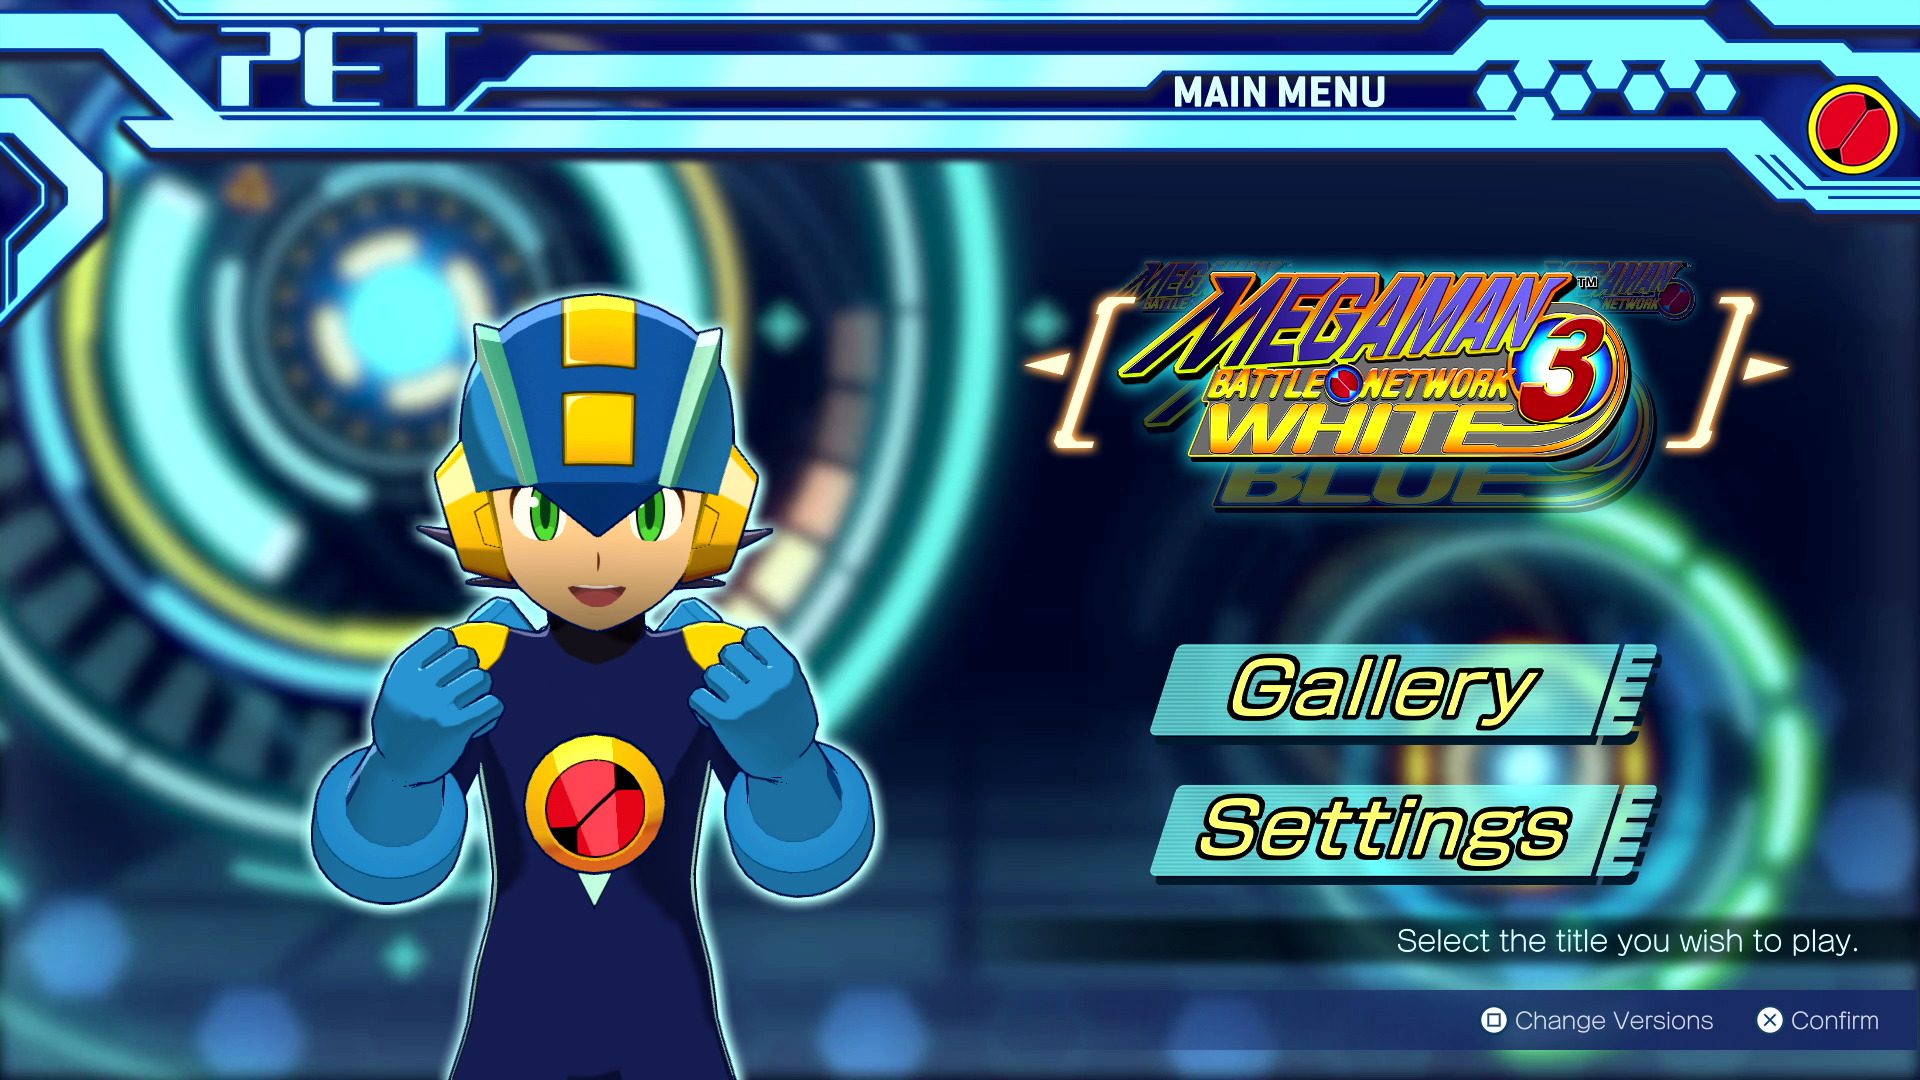 Open the app store or game platform where you downloaded Bass EXE Megaman.
Search for updates for the game.